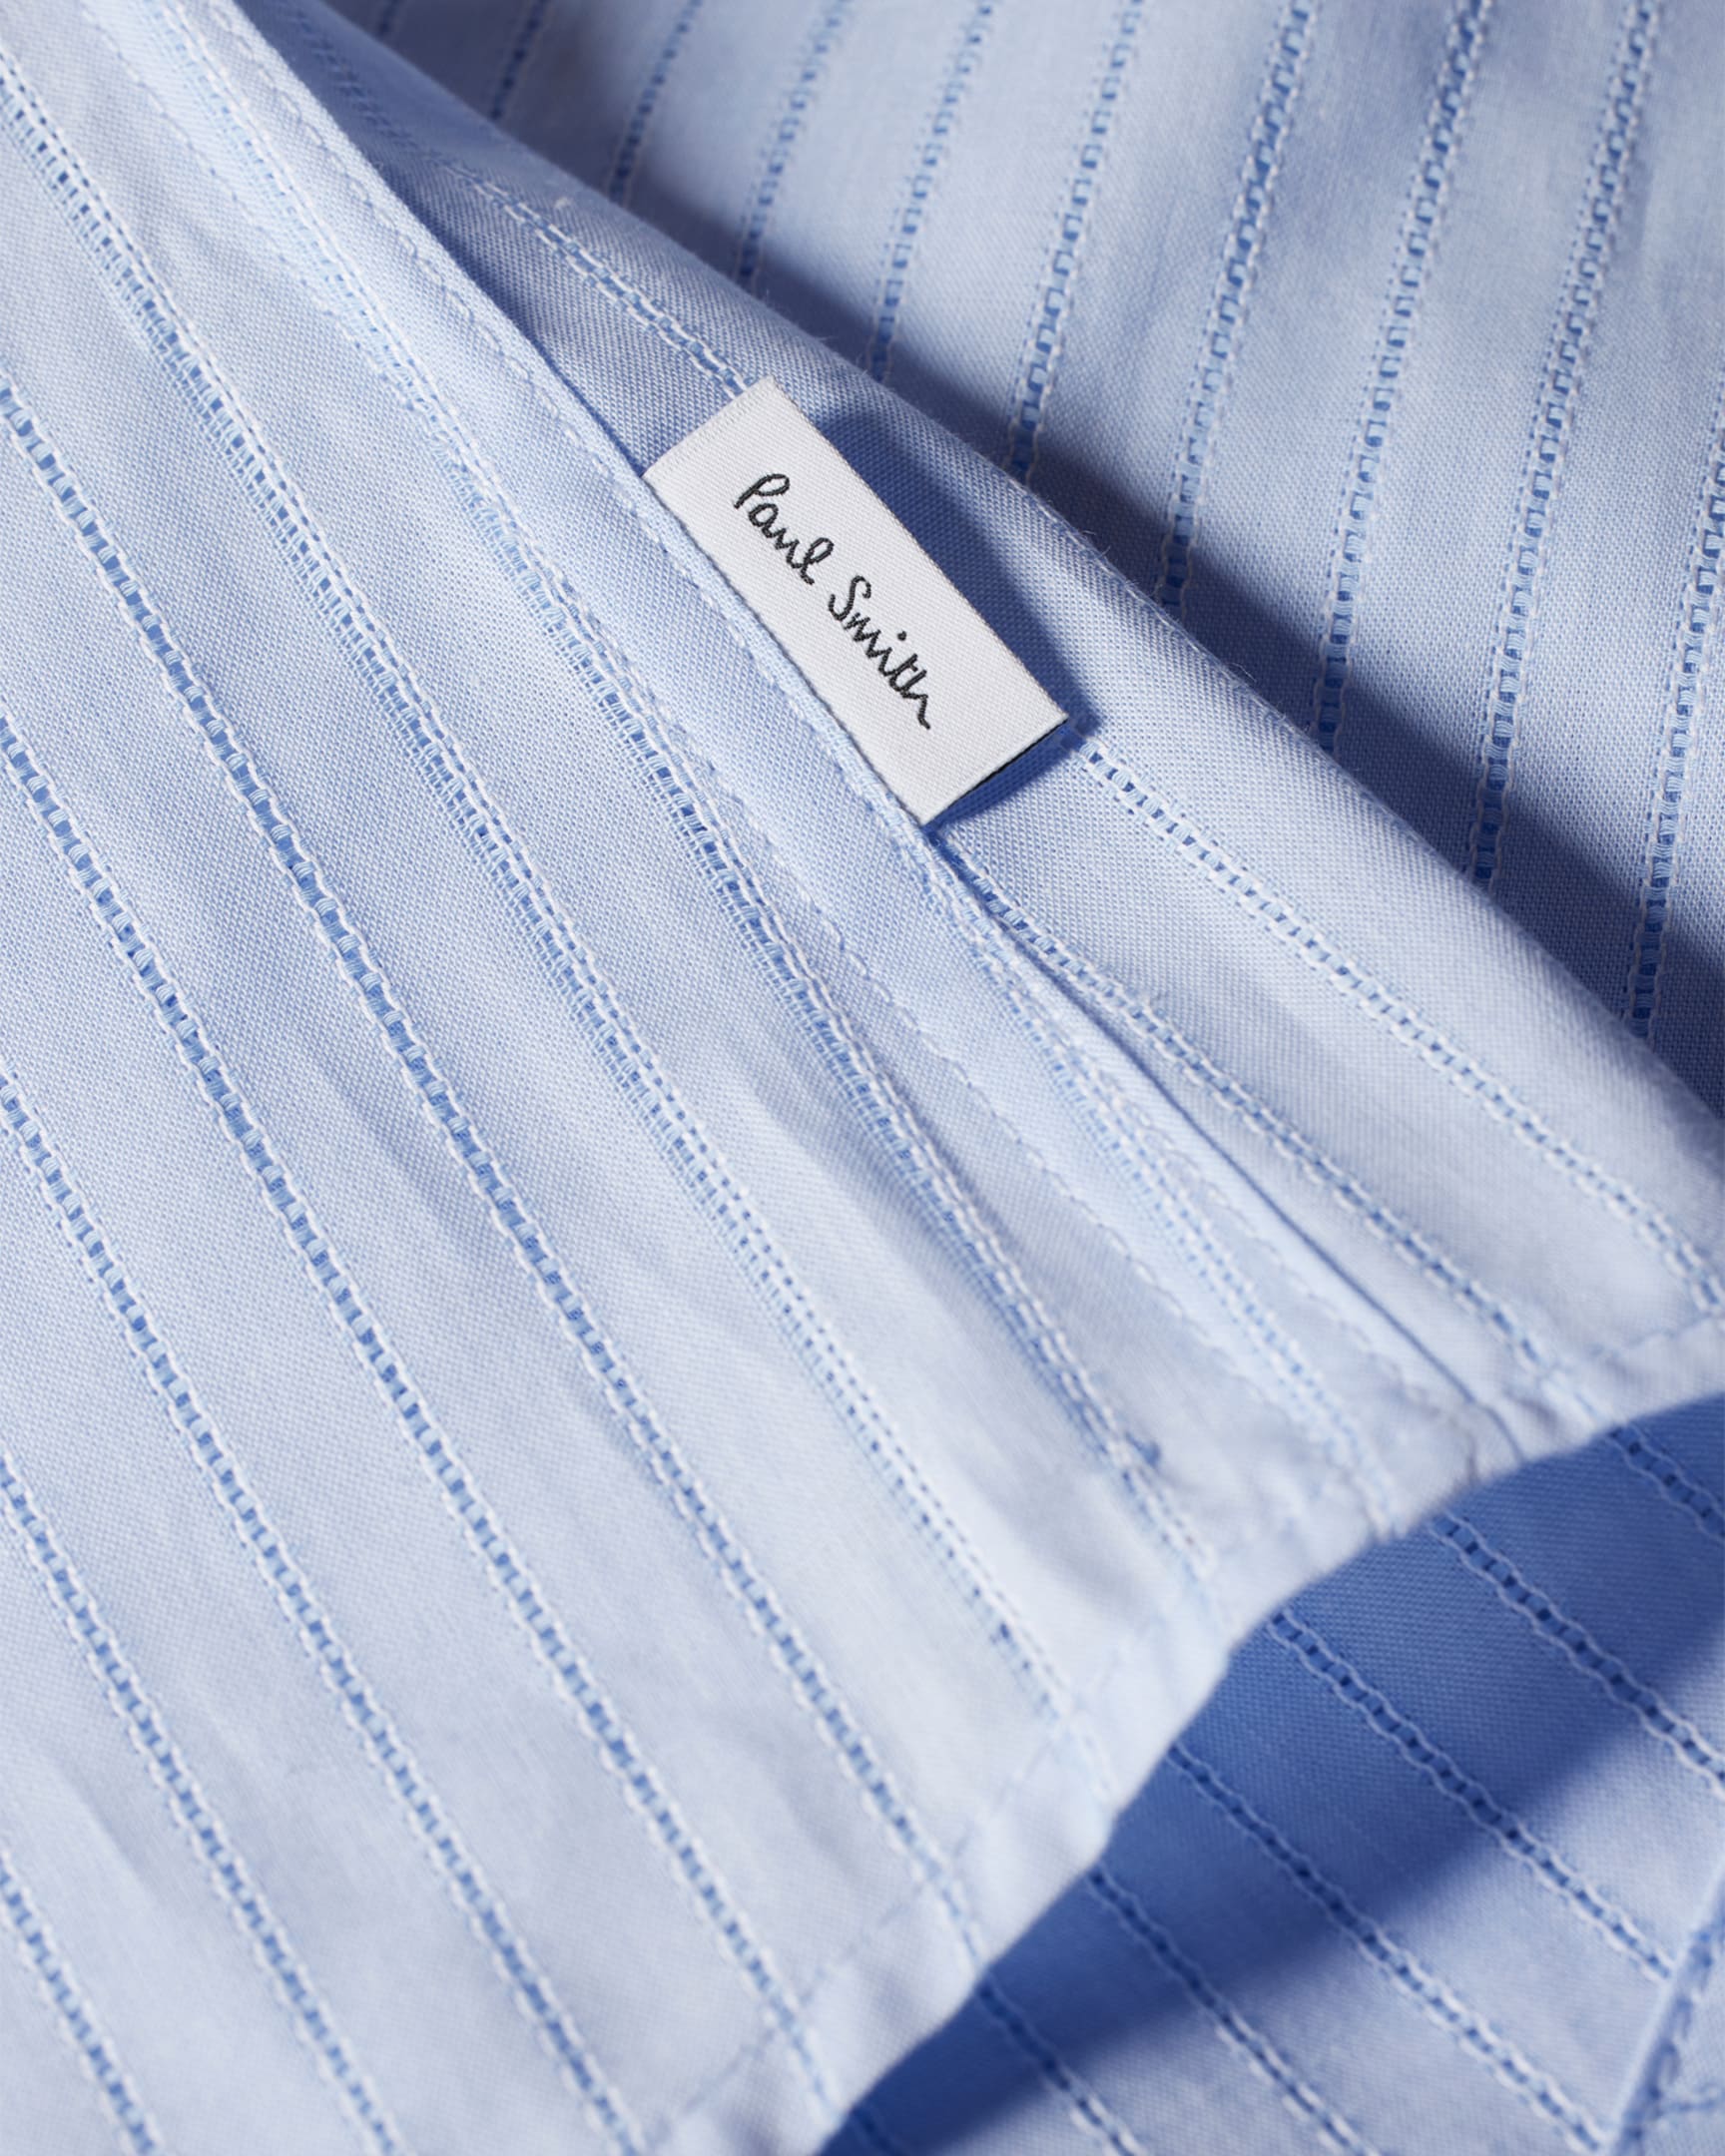 Detail View - Tailored-Fit Light Blue Perforated-Stripe Cotton Shirt Paul Smith